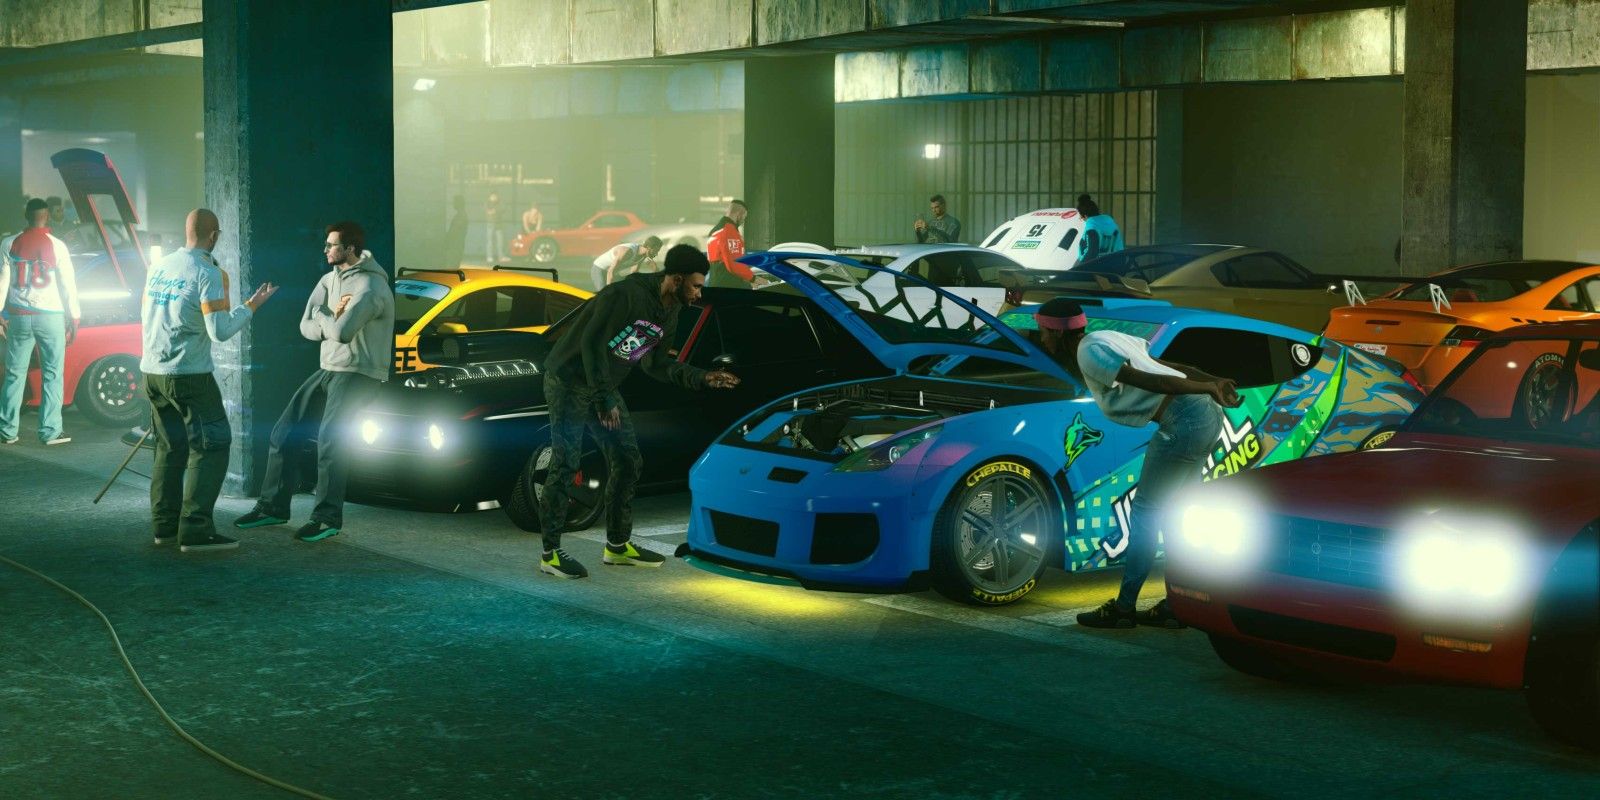 Letting players become experts with their own car would be a great move for GTA 6.